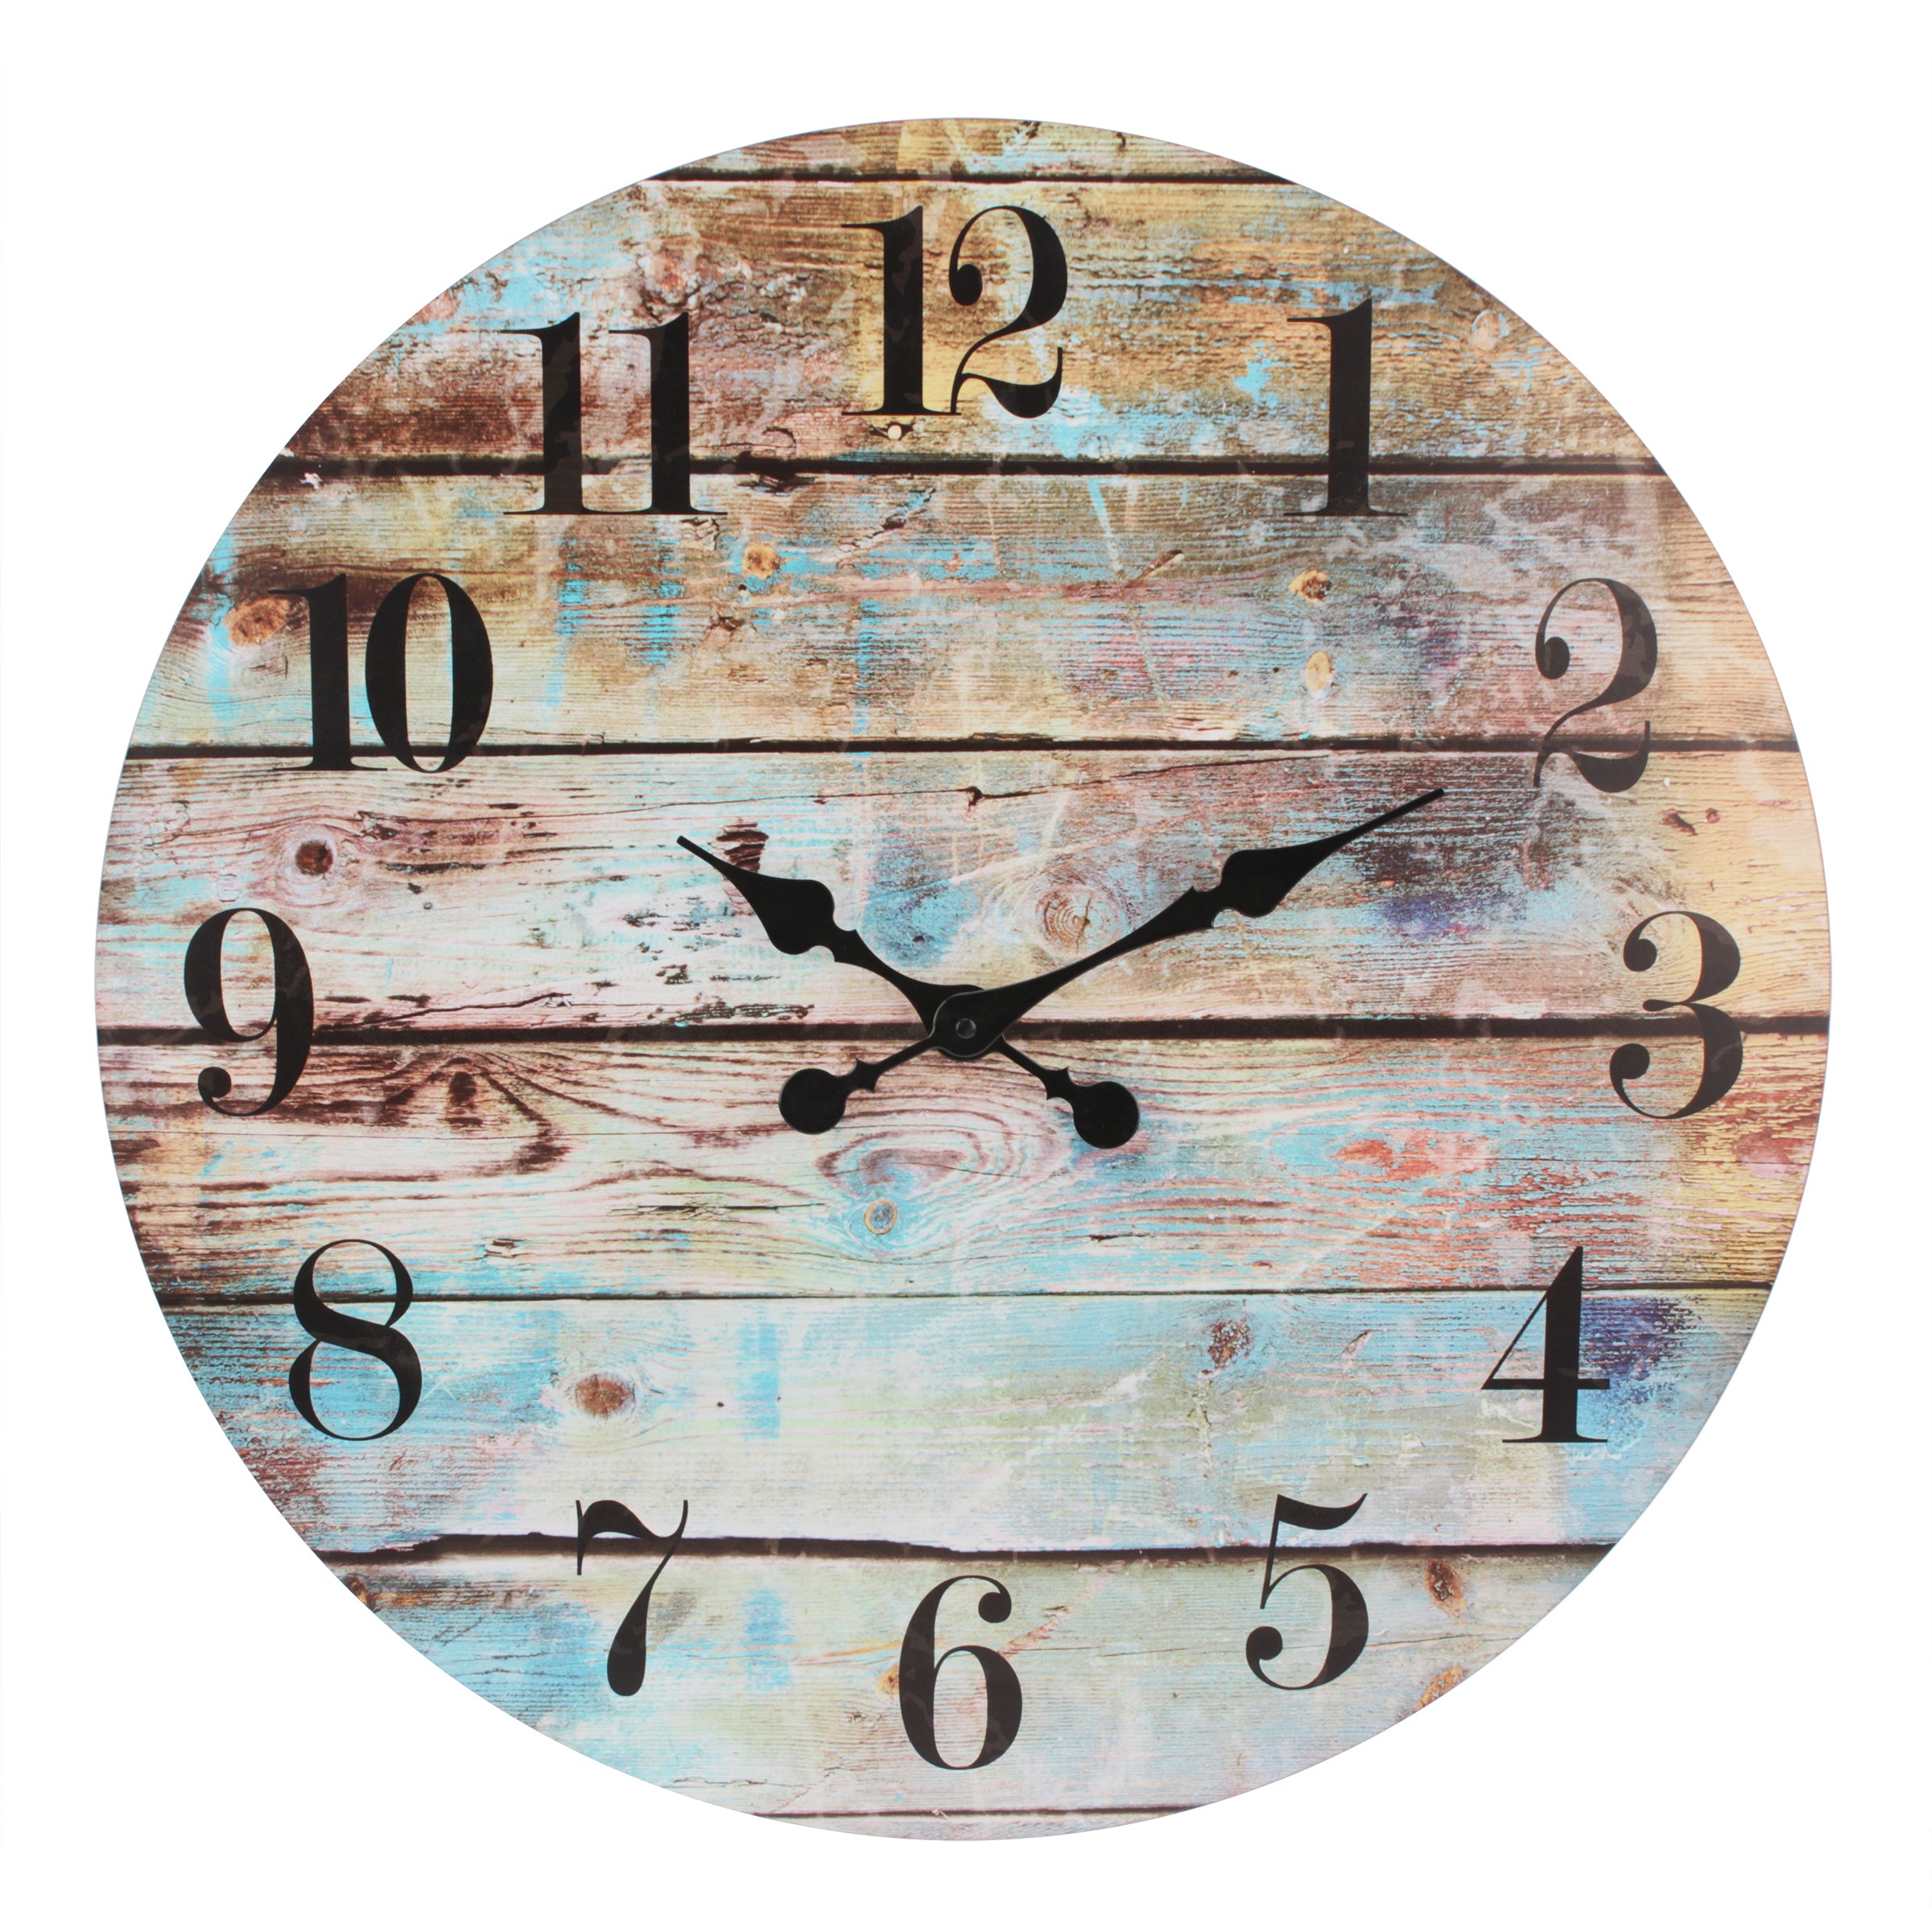 23.6” Round Rustic Wall Clock (WS)